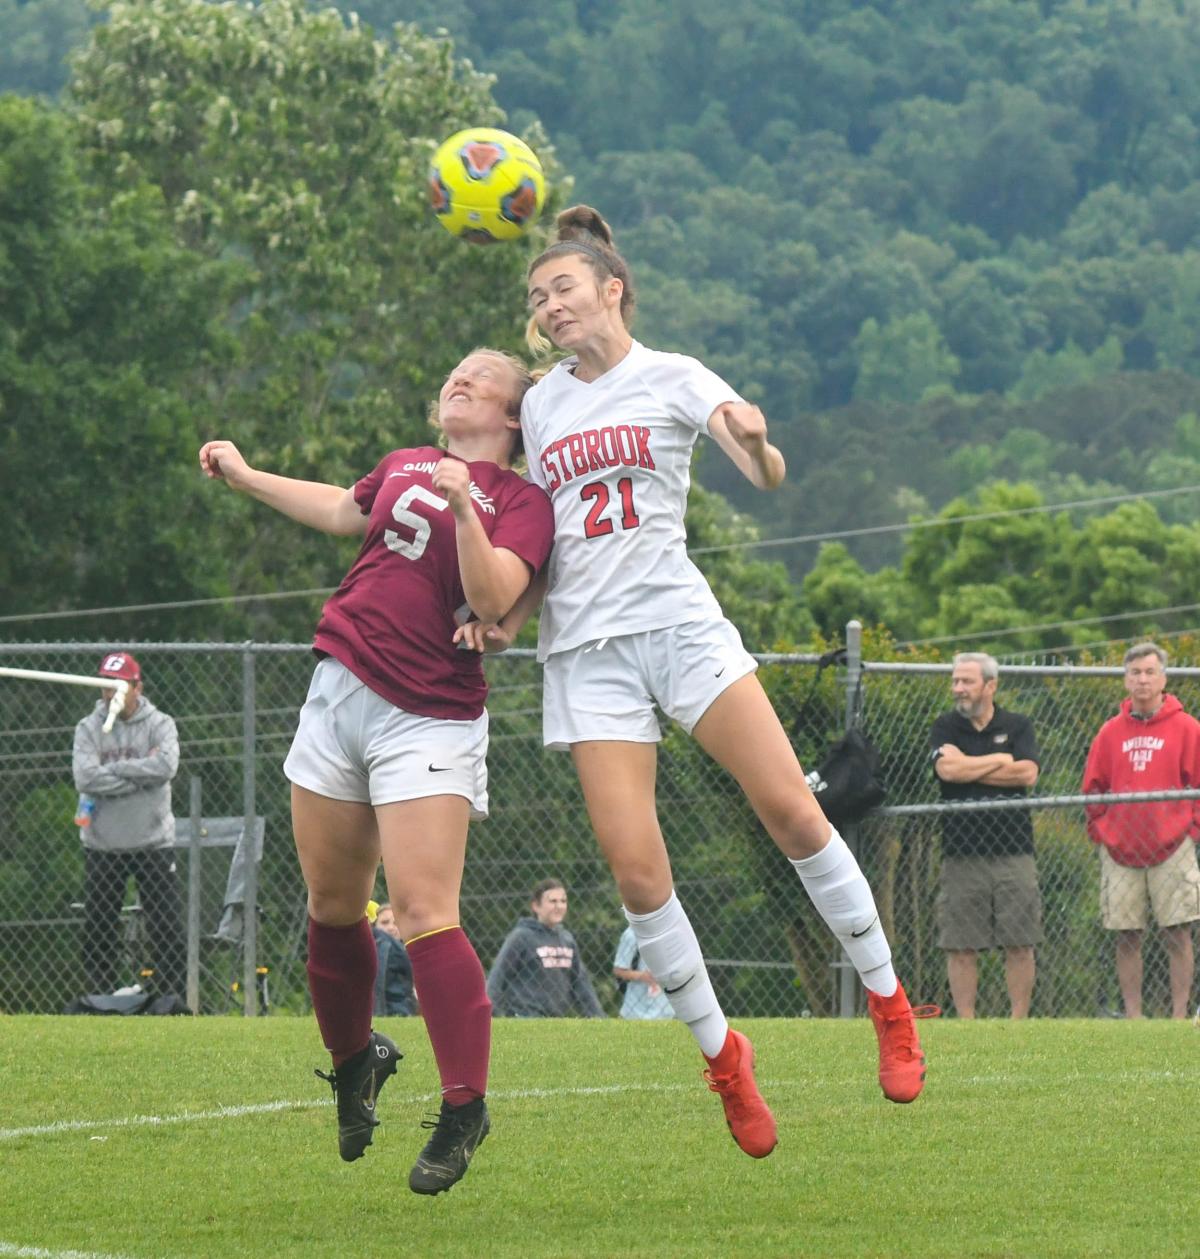 Pairings, scores for Final Four of AHSAA state soccer in Huntsville